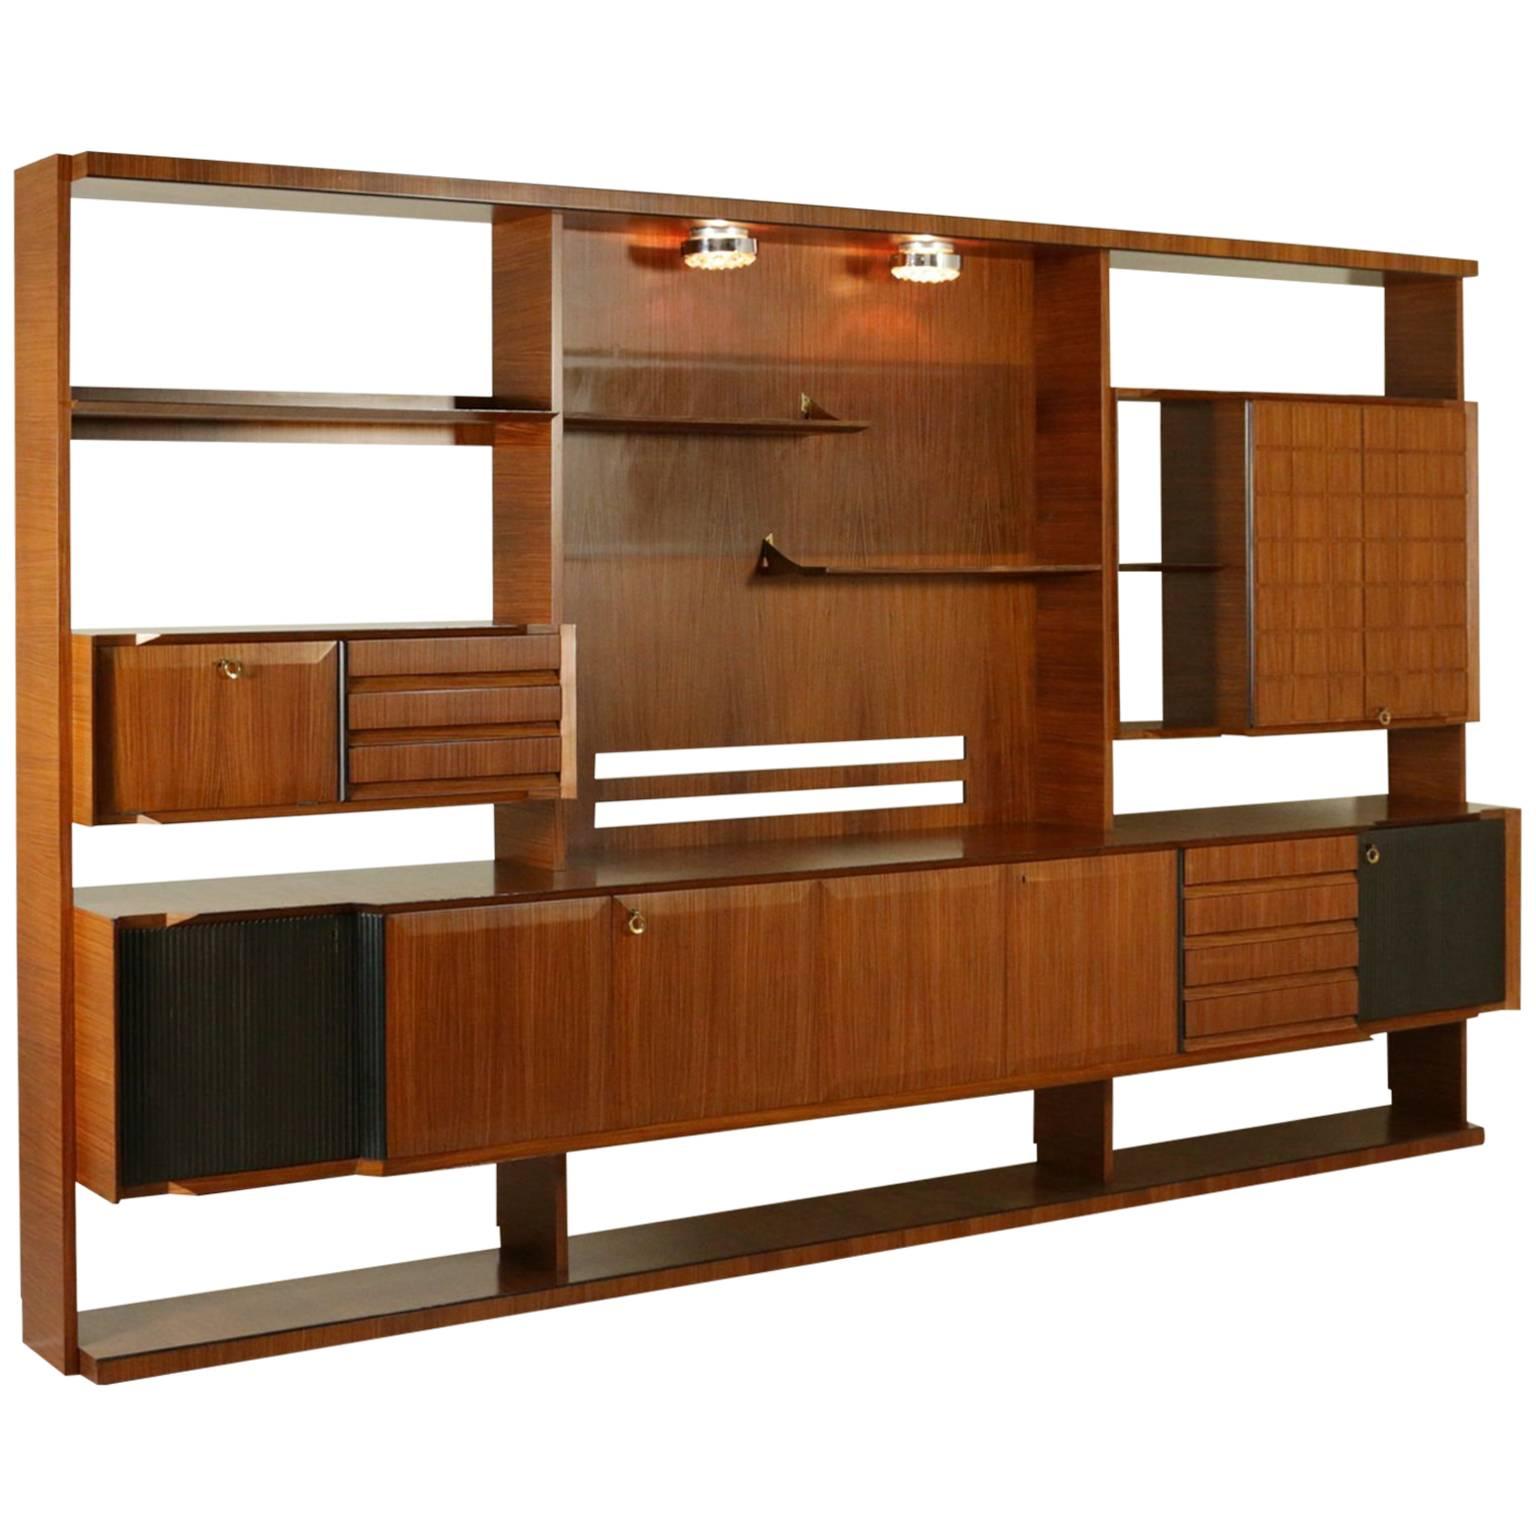 Living Room Cabinet Rosewood Veneer Ebony Stained Panels Vitnage, Italy, 1960s